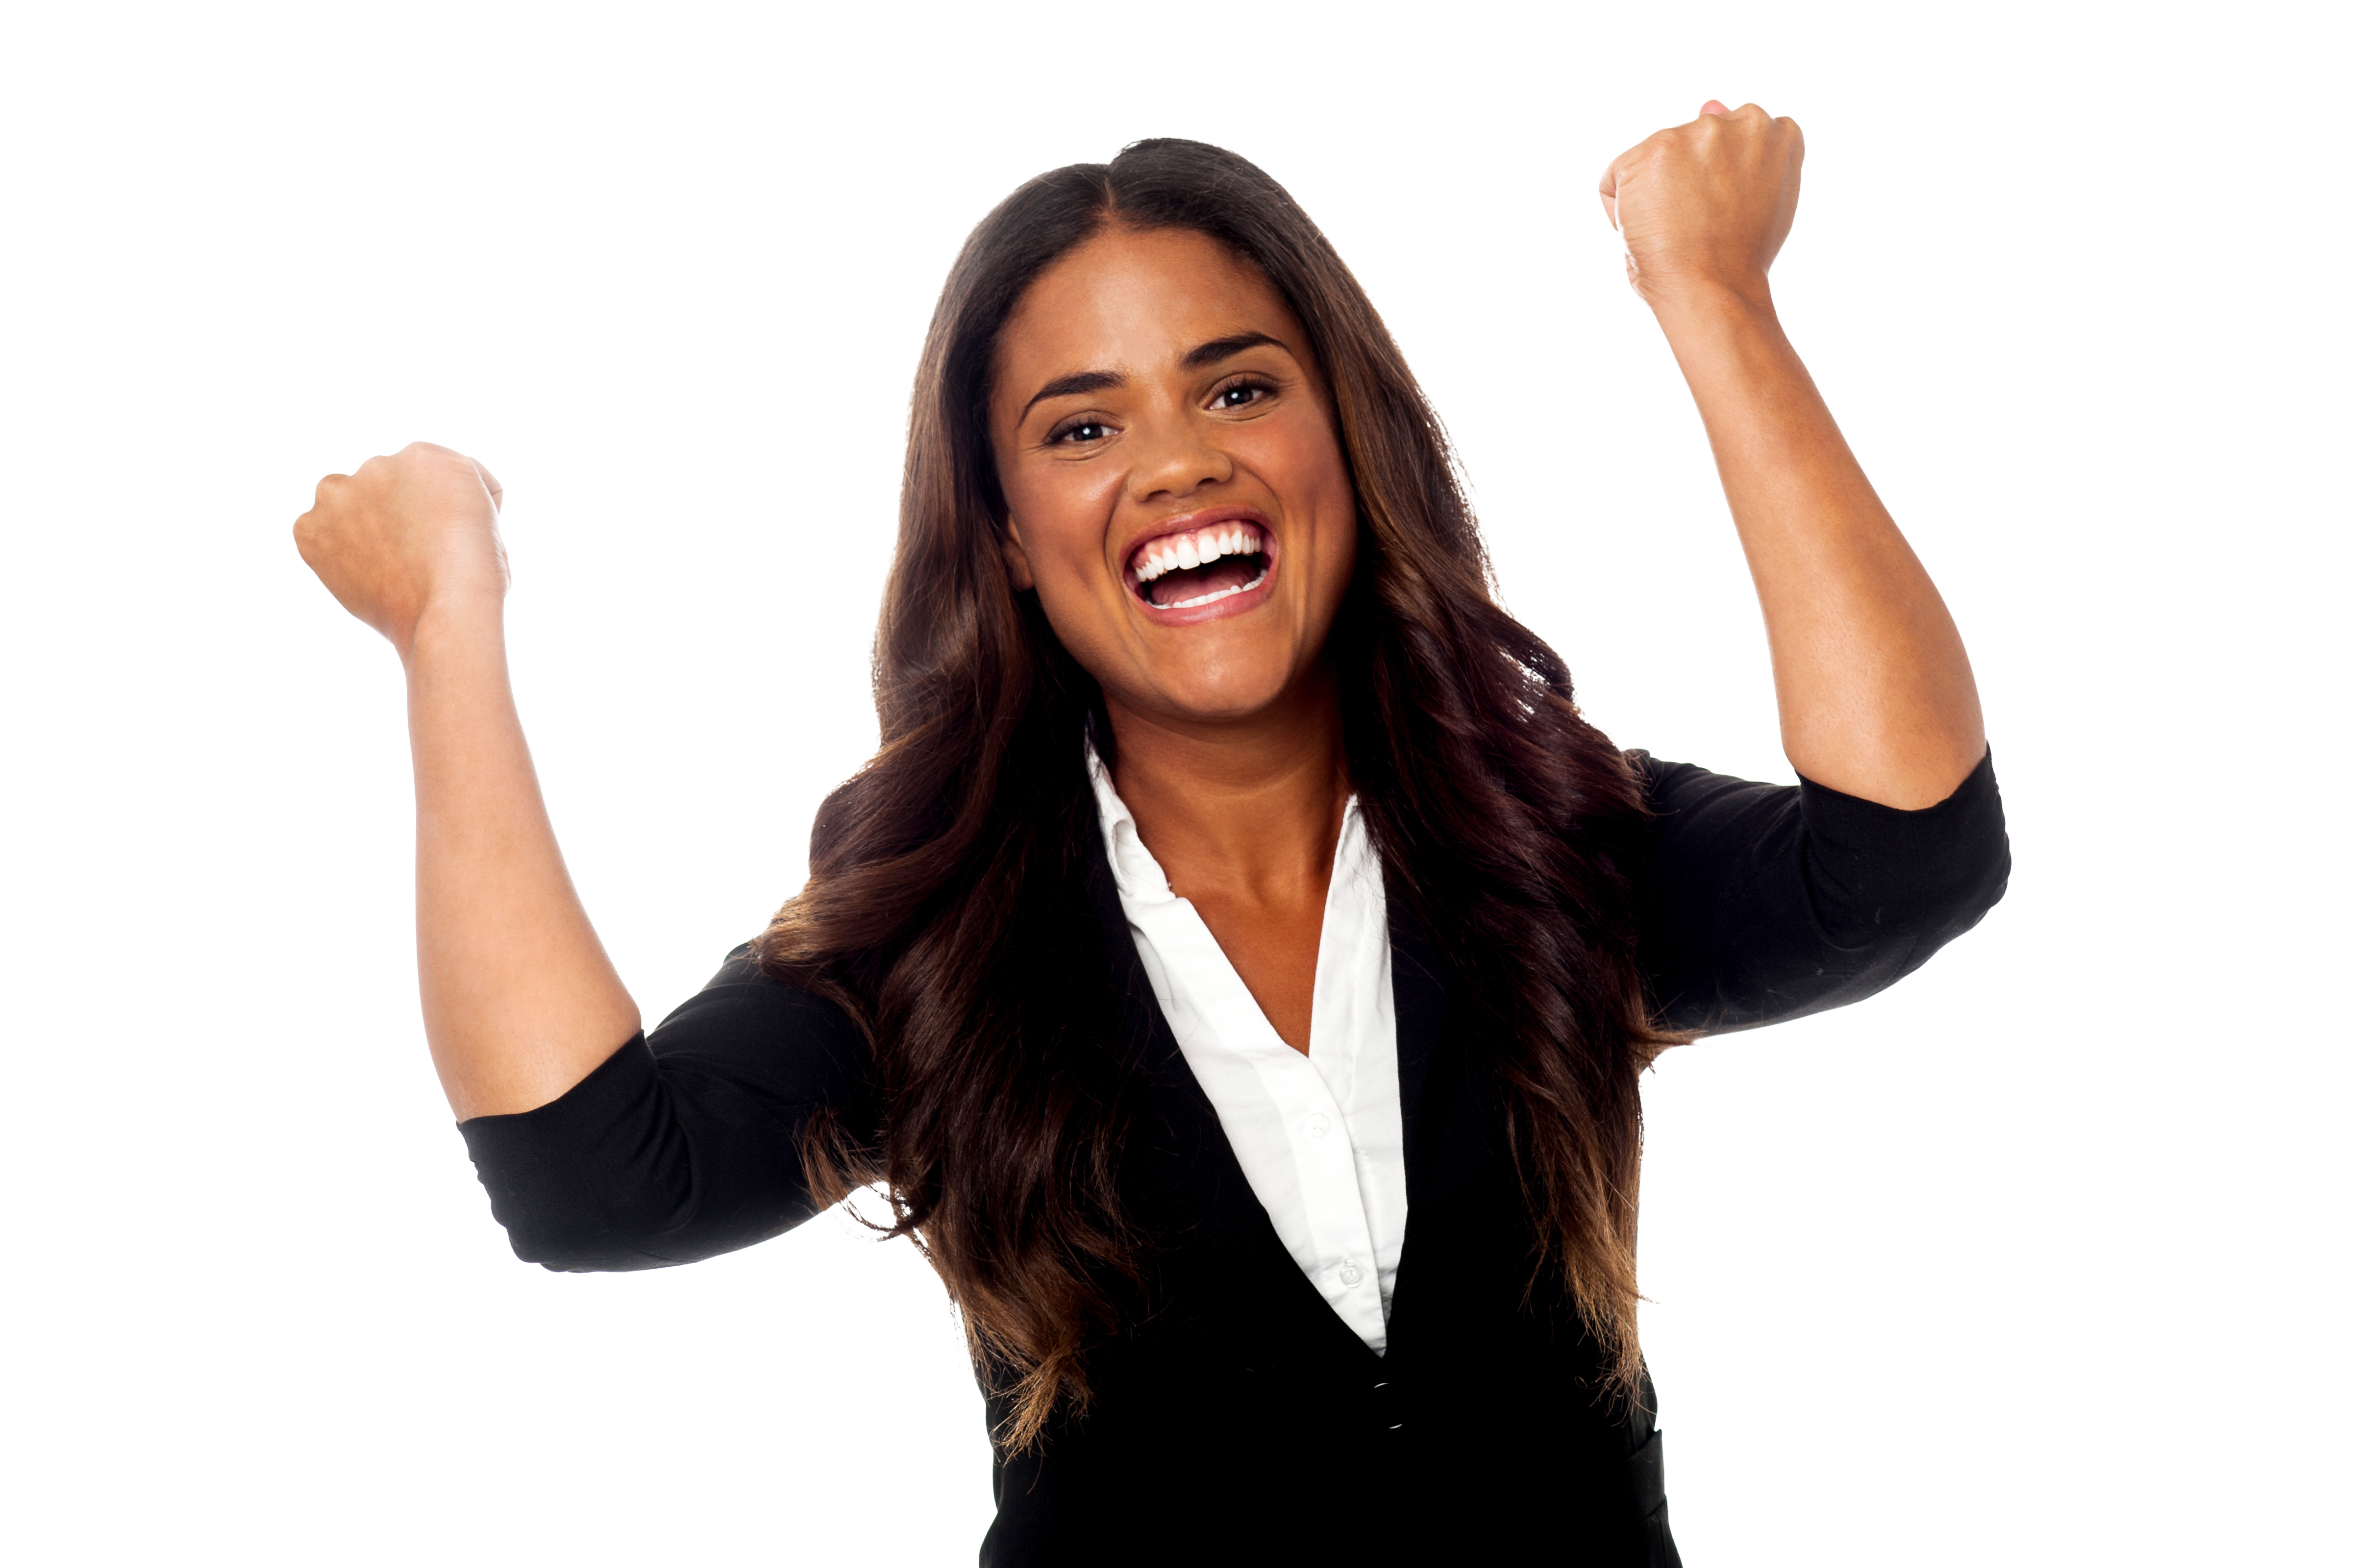 Happy Girl PNG Image for Free Download